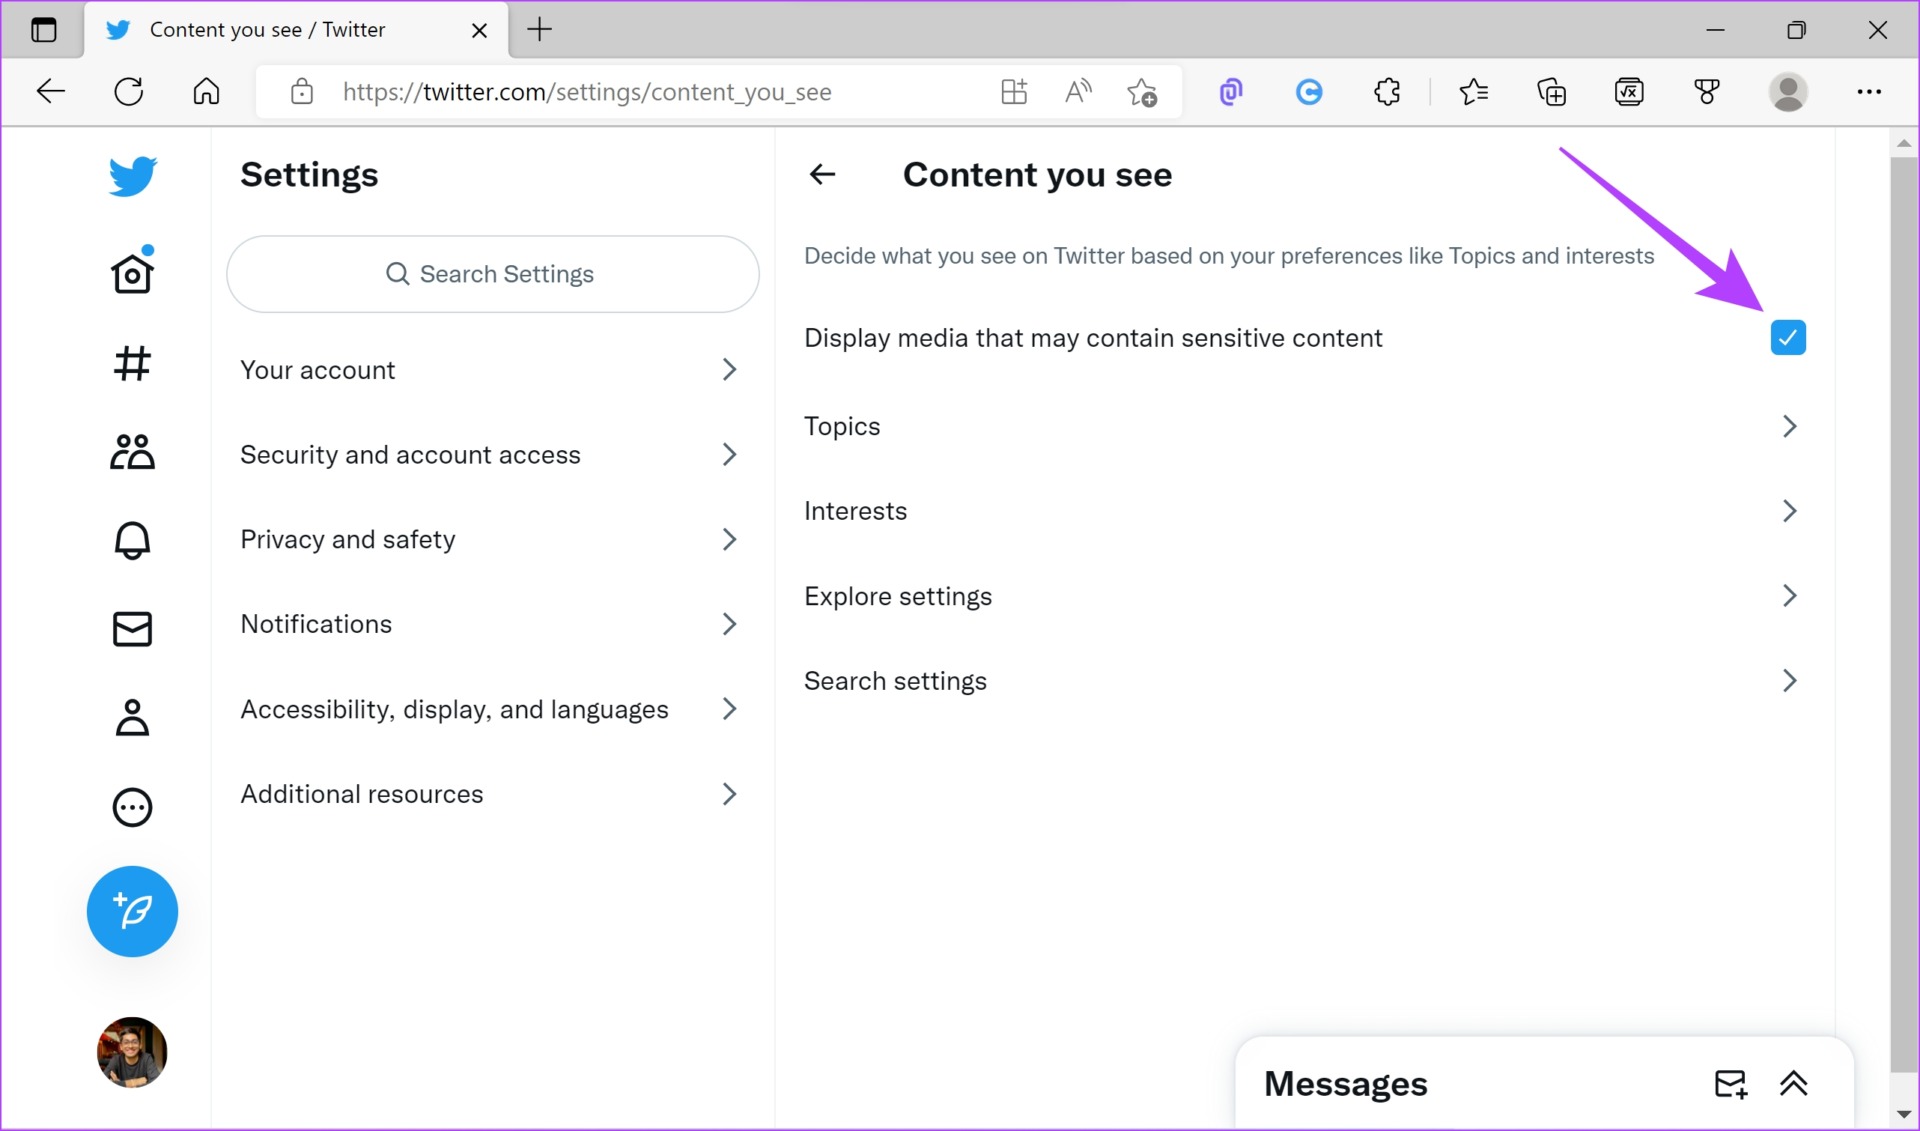  sensitive-content-on-twitter-change-twitter-settings-page  